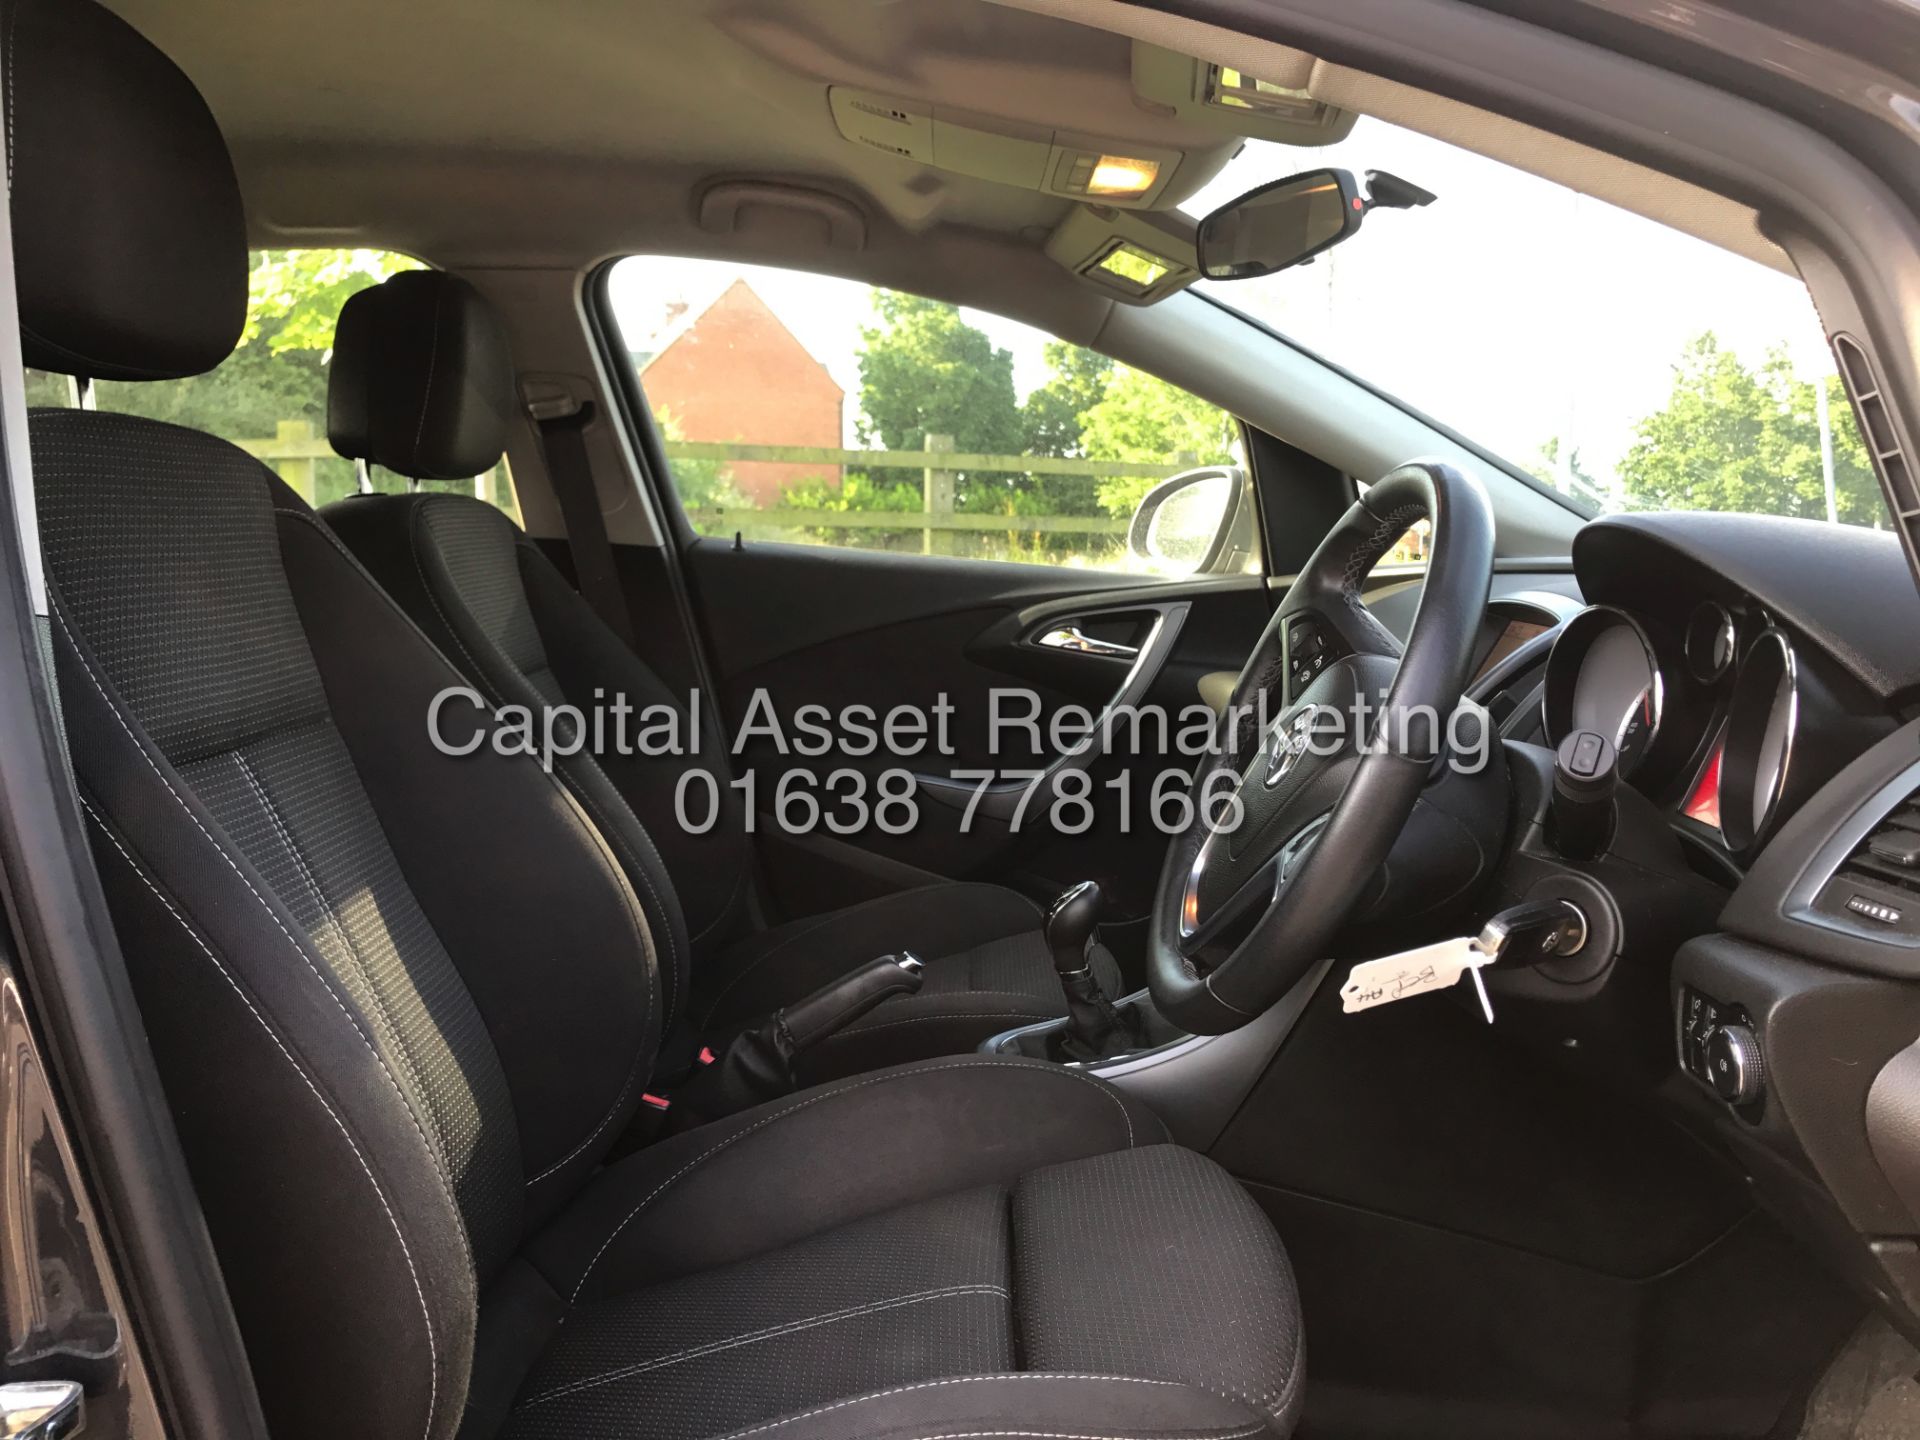 On Sale VAUXHALL ASTRA 1.3CDTI "TECH LINE" ESTATE (2013 MODEL) 1 OWNER WITH HISTORY SAT NAV AIR CON - Image 11 of 20